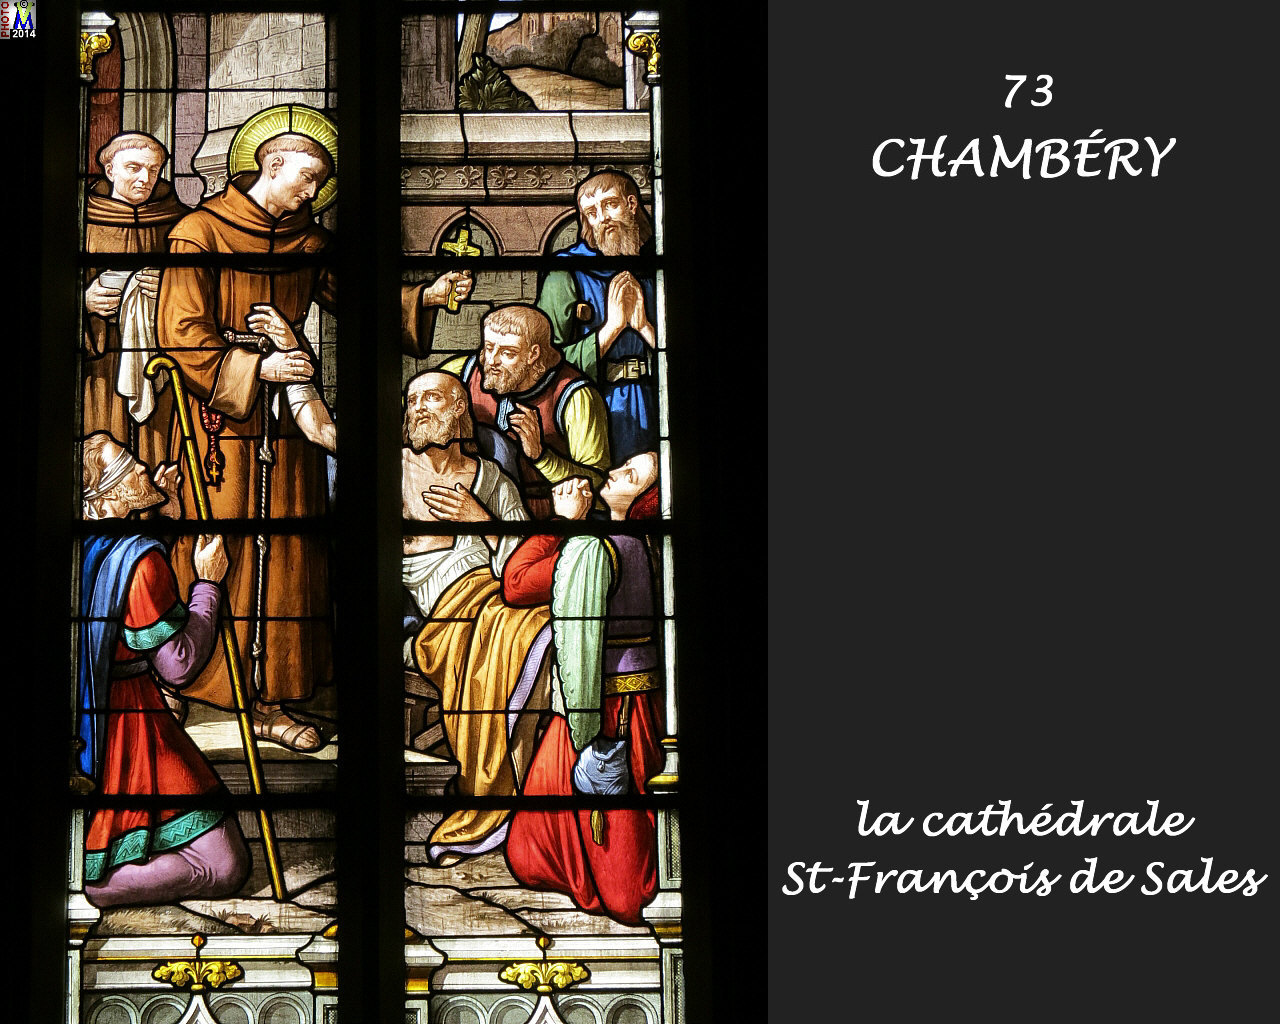 73CHAMBERY_cathedrale_212.jpg